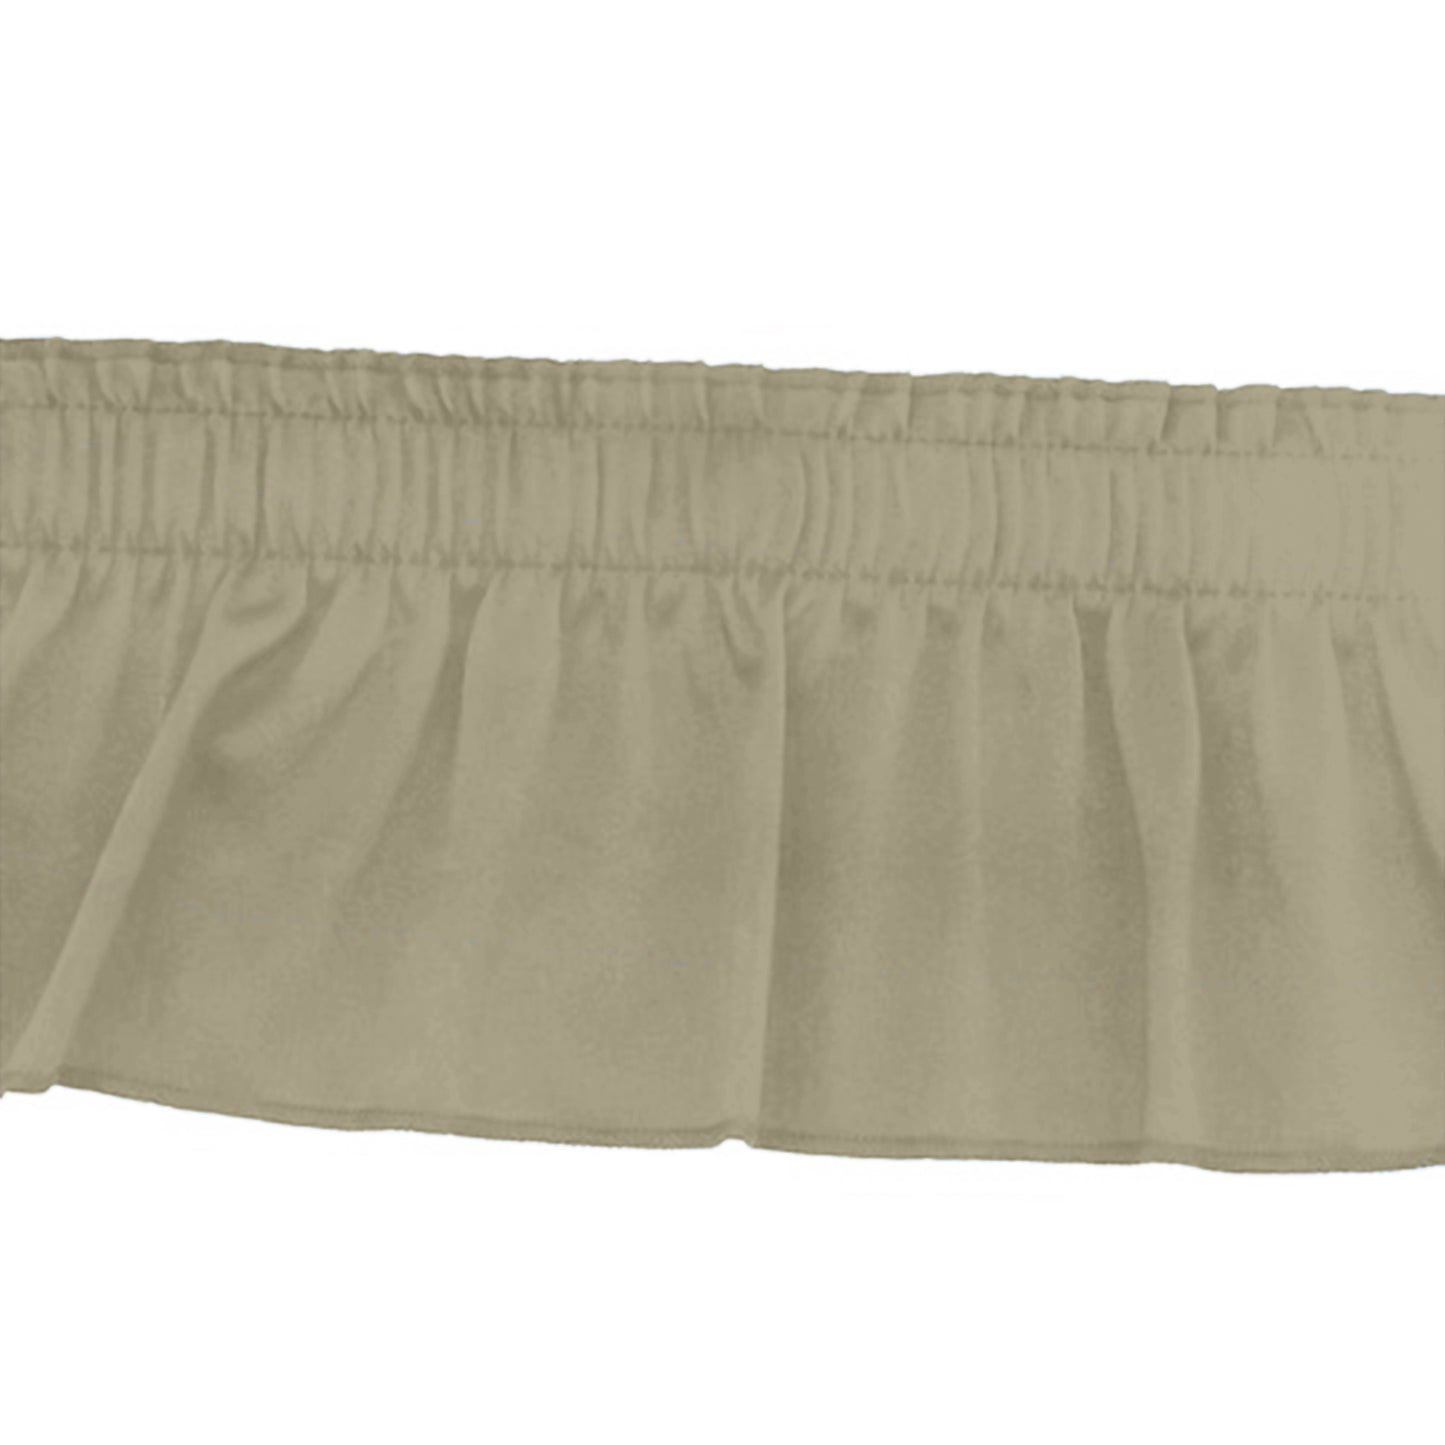 AmTab Stage and Riser Skirting - Shirred Pleat - 23" Skirting Height - Applicable for 24" Stage Height   (AmTab AMT-SKRT24)